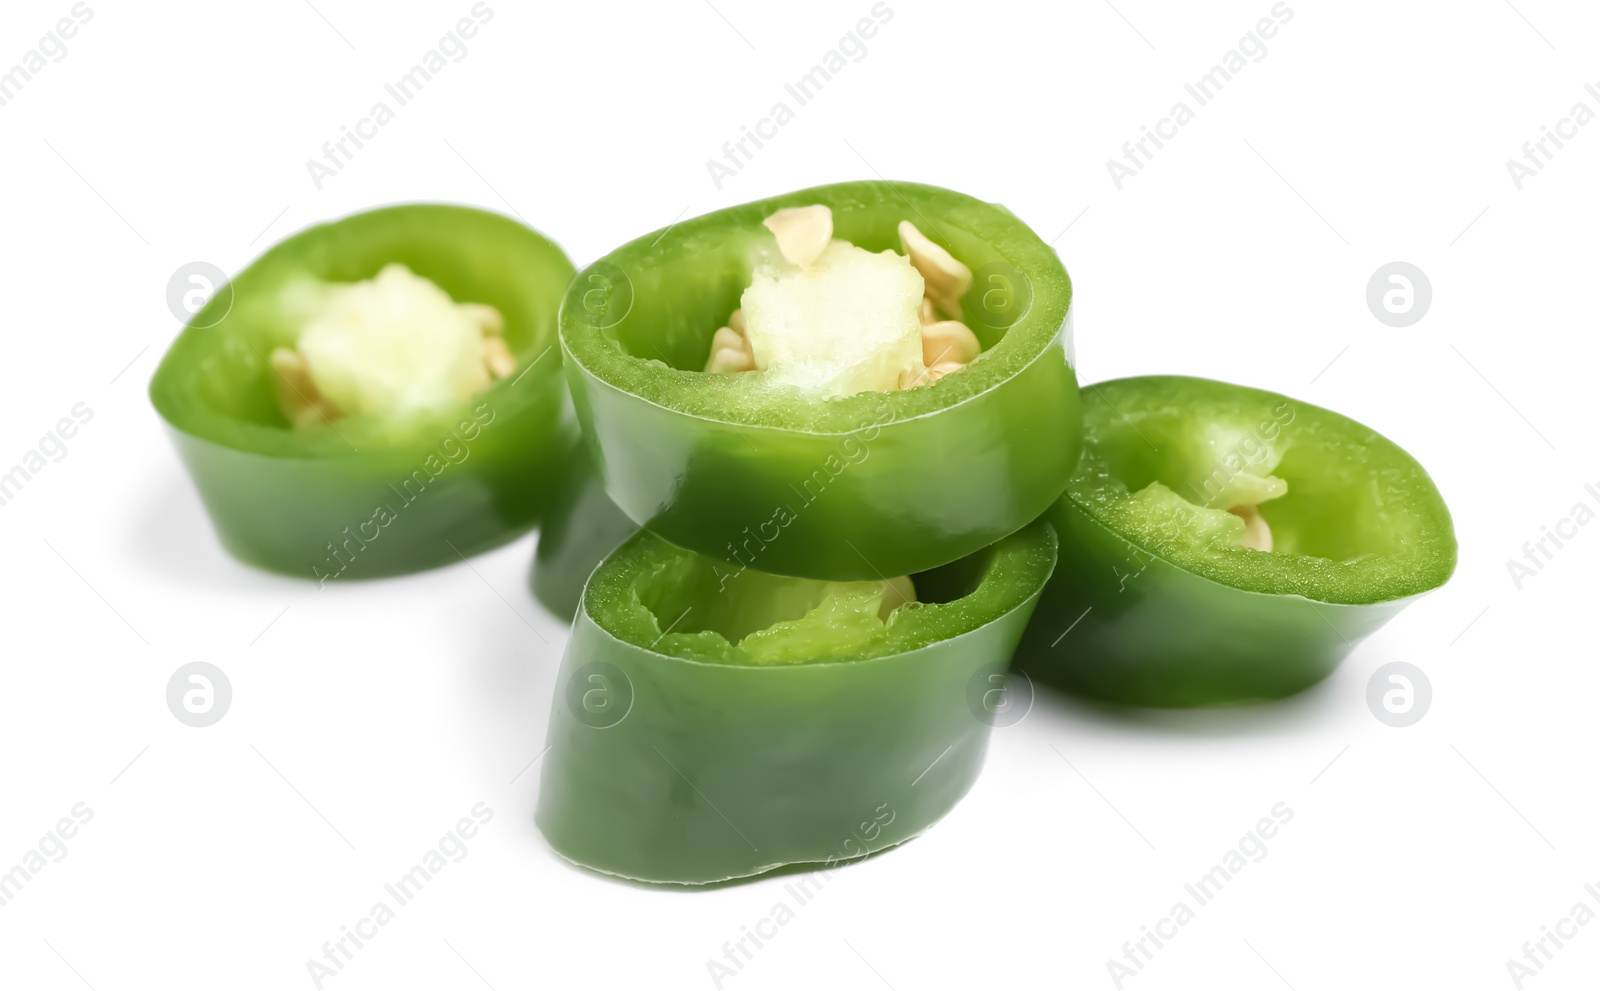 Photo of Cut green hot chili pepper on white background